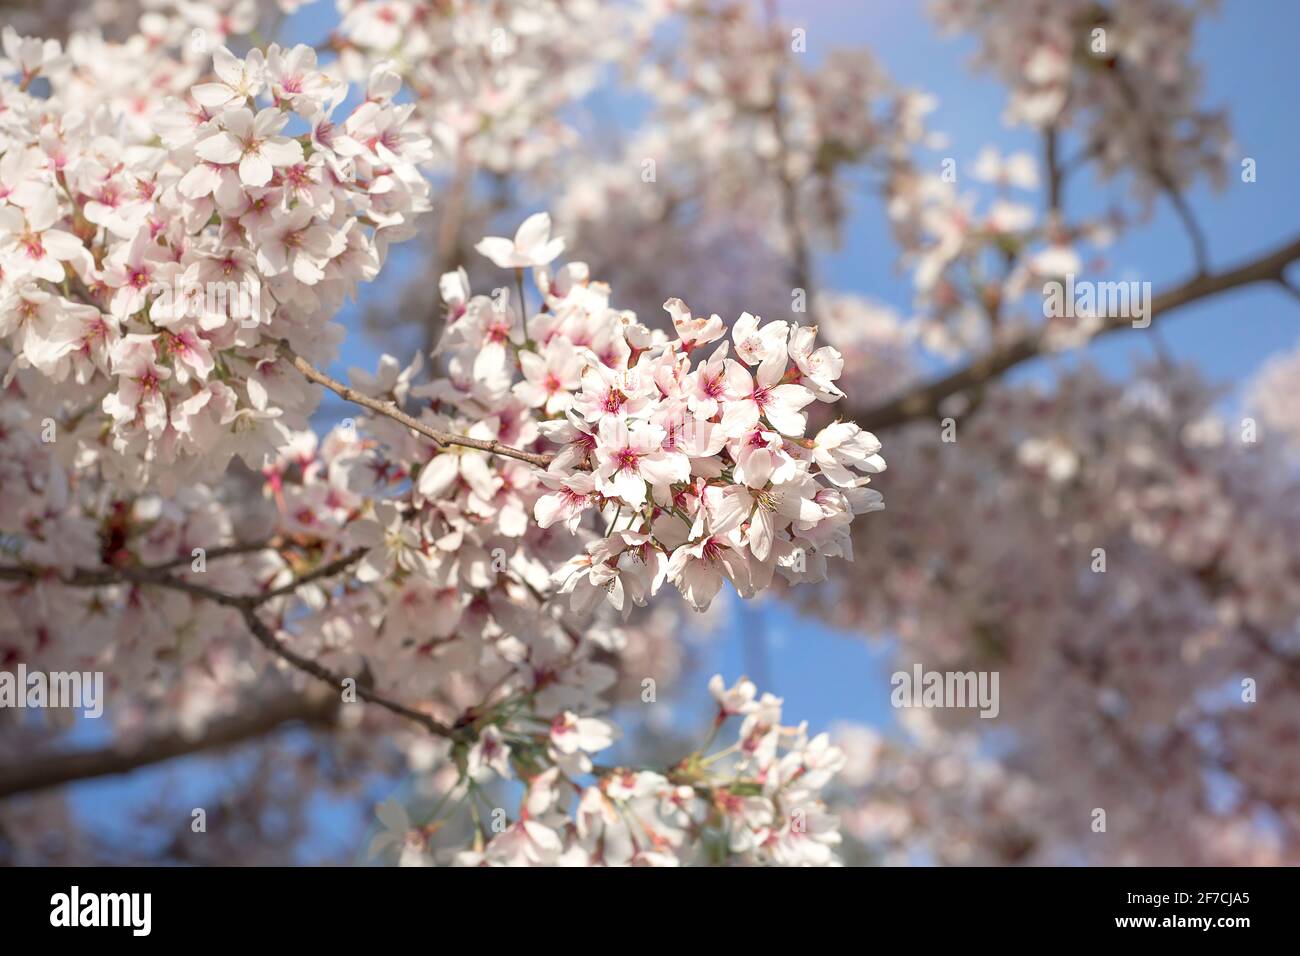 Blooming spring fruit tree branches. Beautiful white flowers, blue sky. Spring peak blossom, flowering brunch close-up. Beautiful weather. Stock Photo